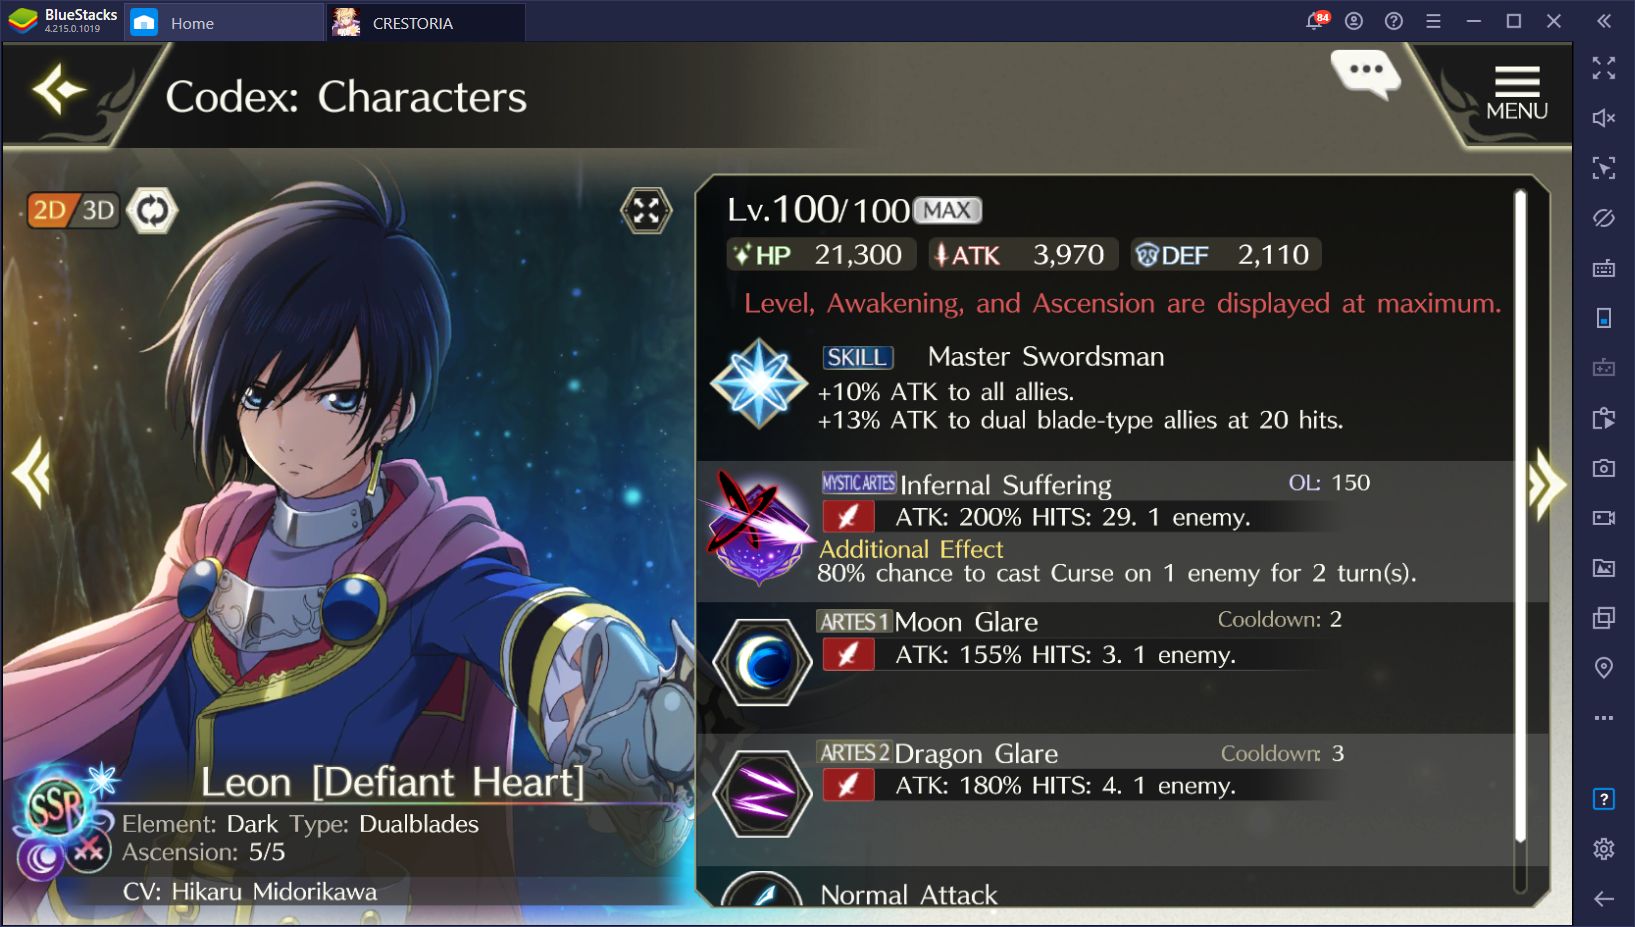 Tales of Crestoria Reroll Guide - How to Summon the Best Character From the Start